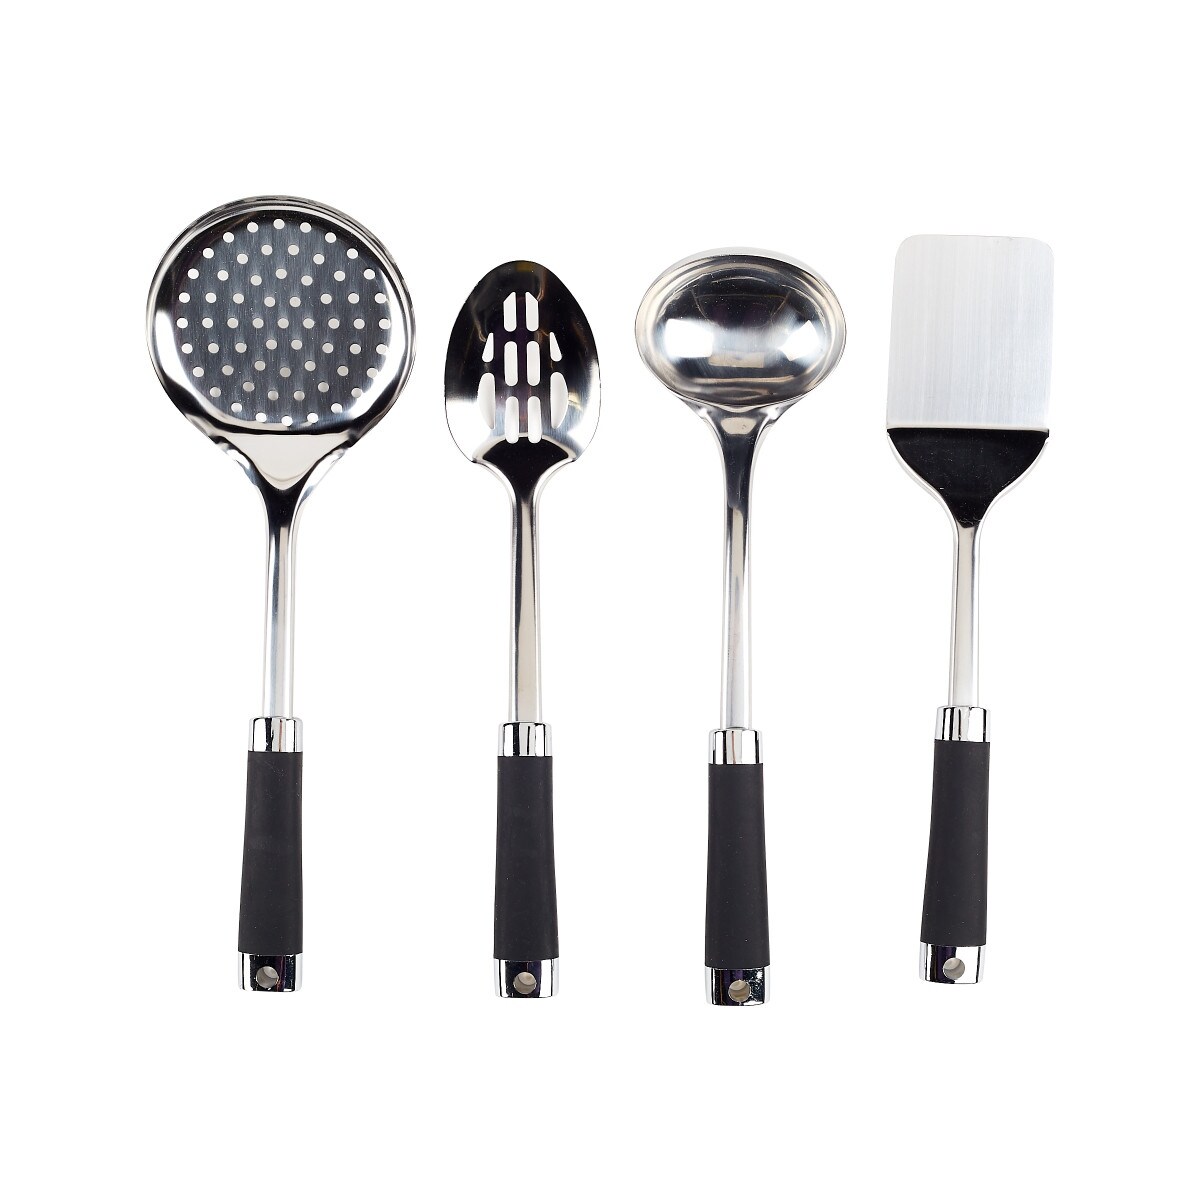 5Pcs Kitchen Cooking Utensils Set Stainless Steel Spoons Spatula with  Ergonomic Handle Heavy-Duty Washable Spoons Utensils